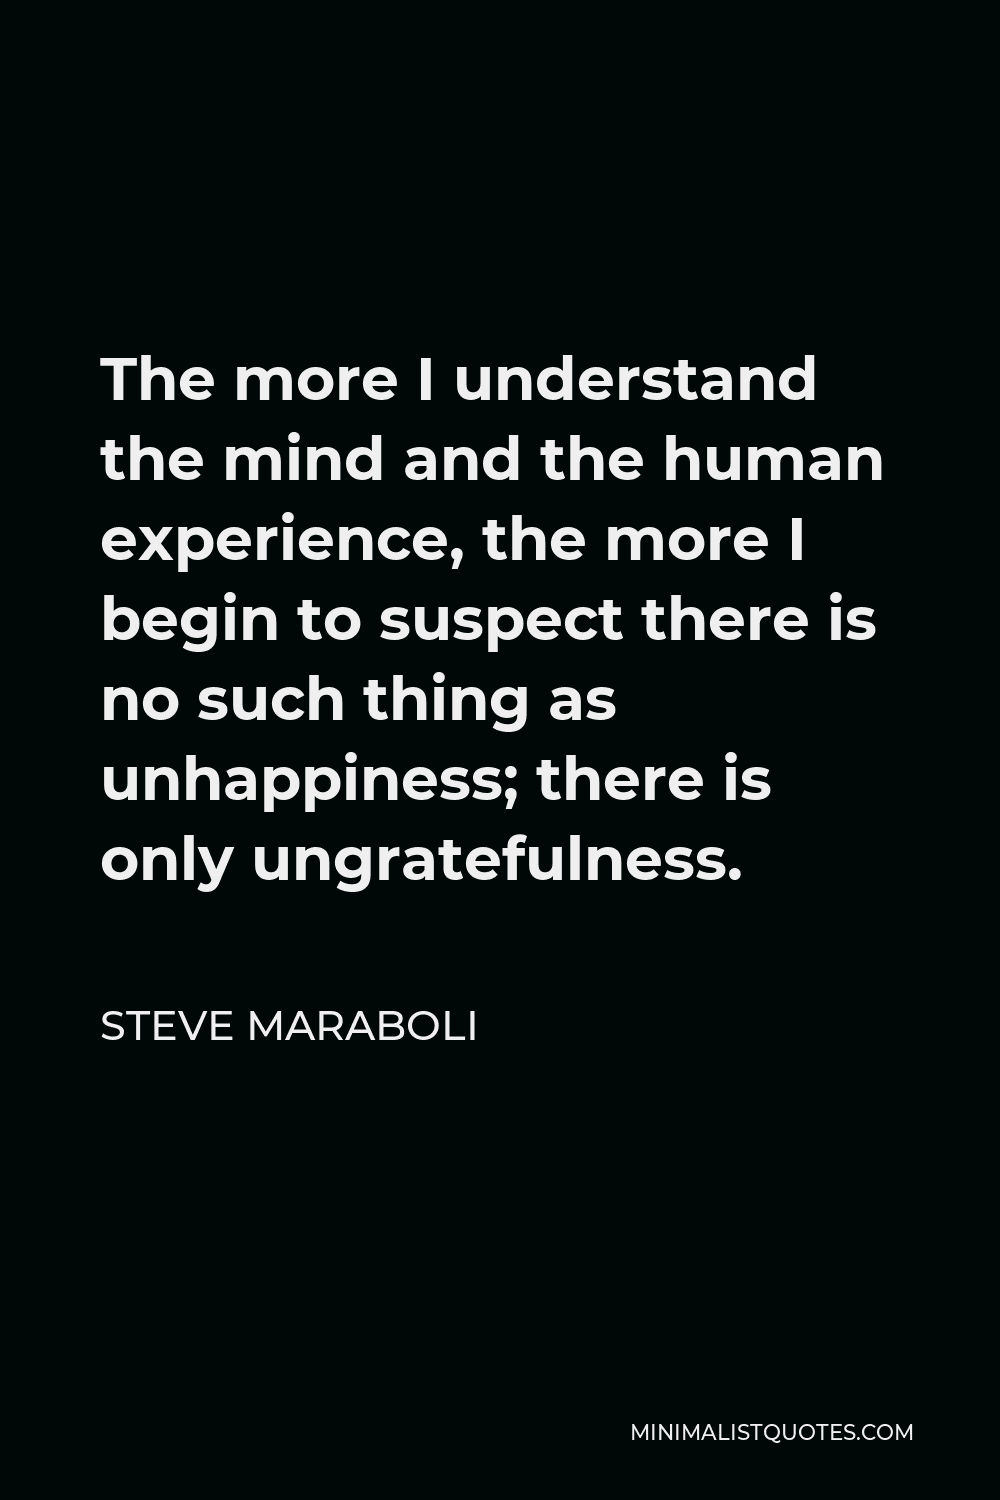 Steve Maraboli Quote - The more I understand the mind and the human experience, the more I begin to suspect there is no such thing as unhappiness; there is only ungratefulness.